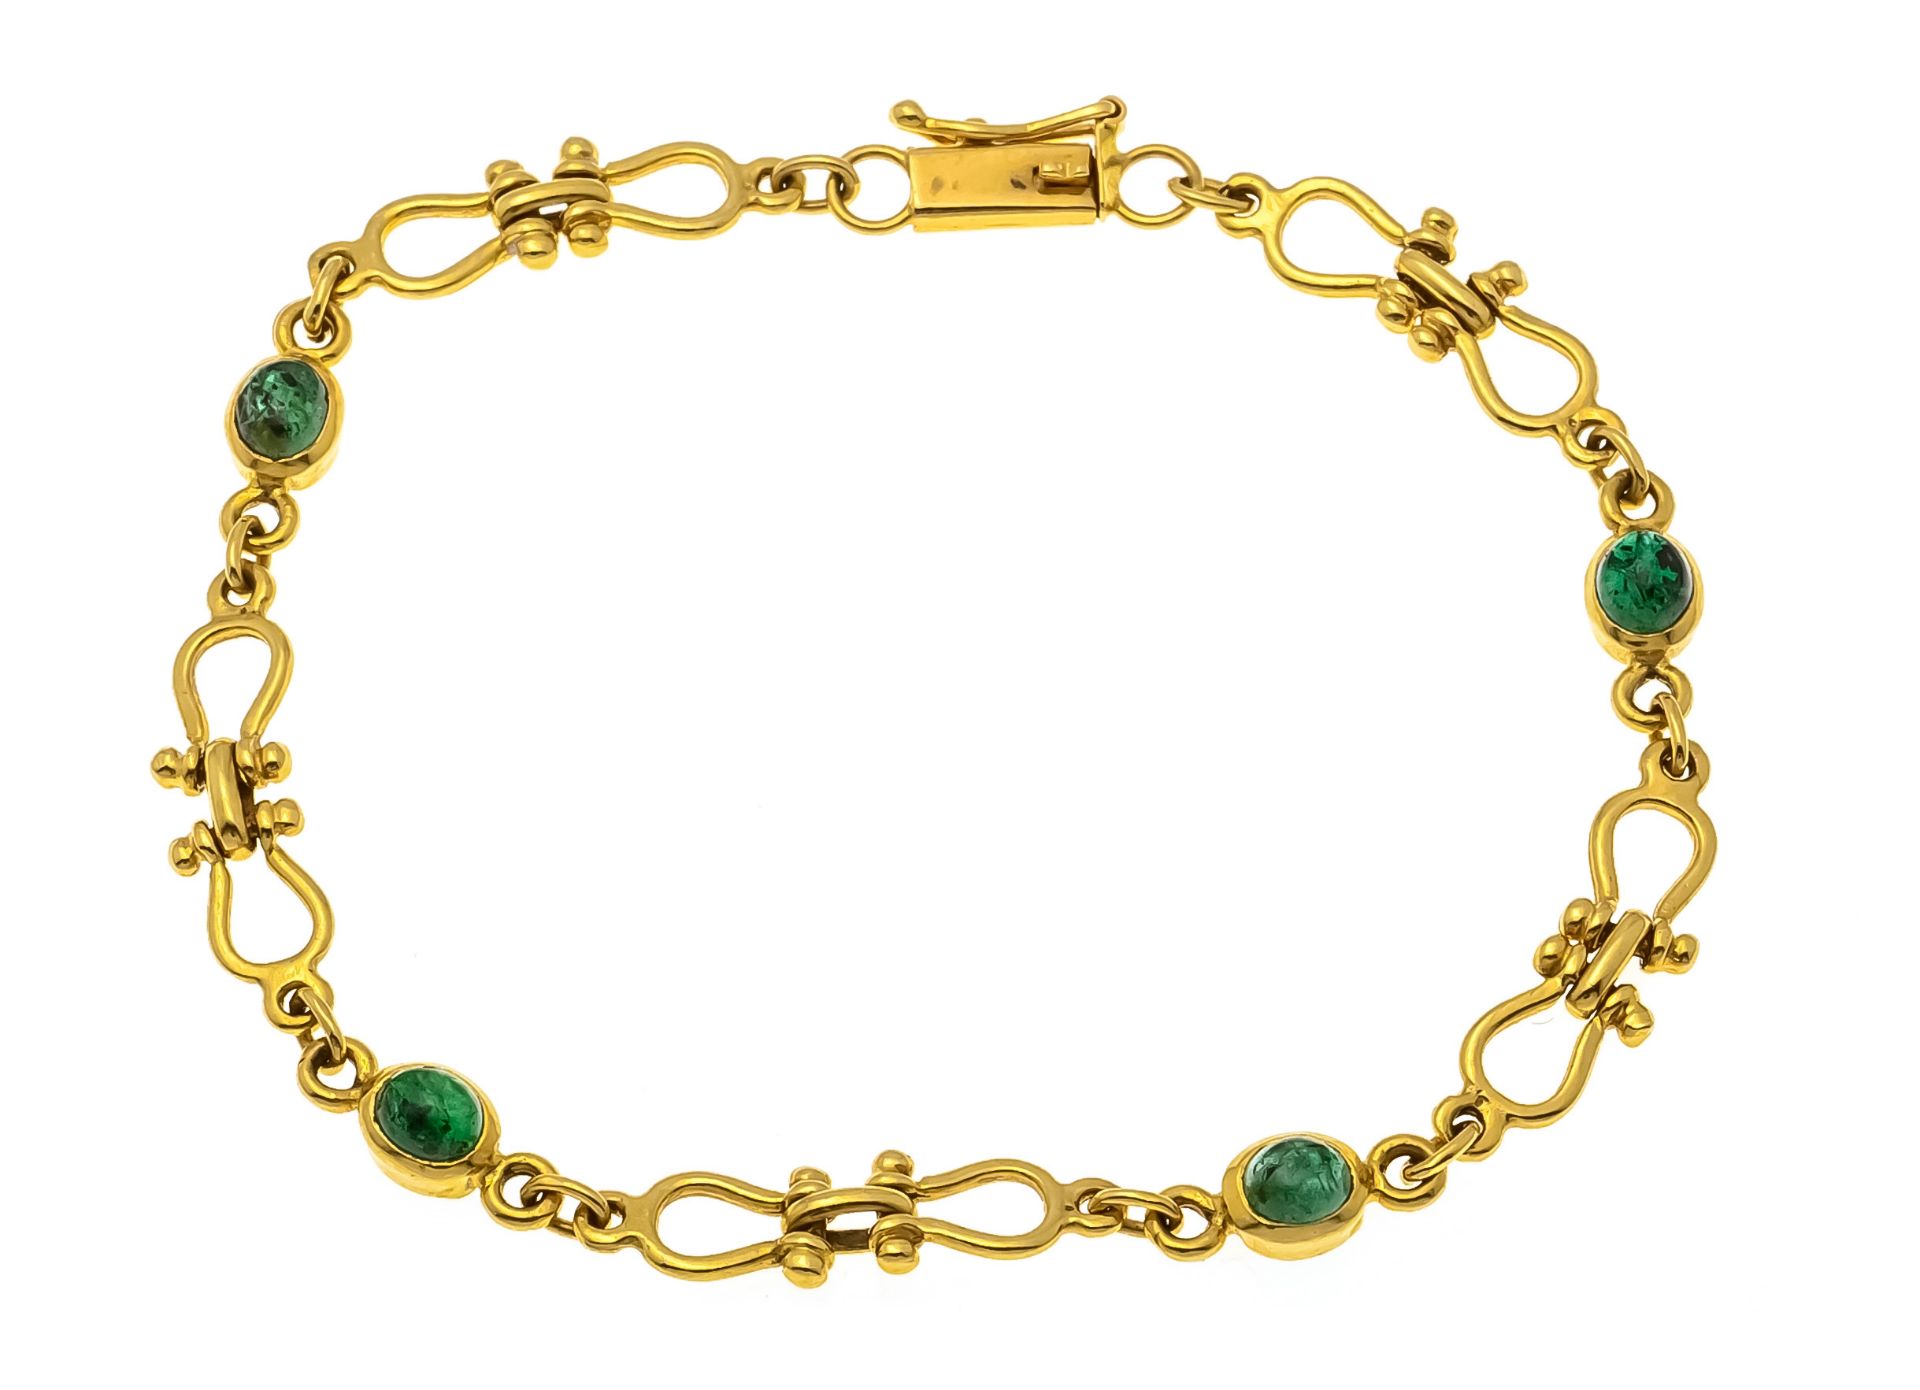 Emerald bracelet GG 750/000 with 4 oval emerald cabochons 4,3 x 3,8 mm, green, translucent, bumped